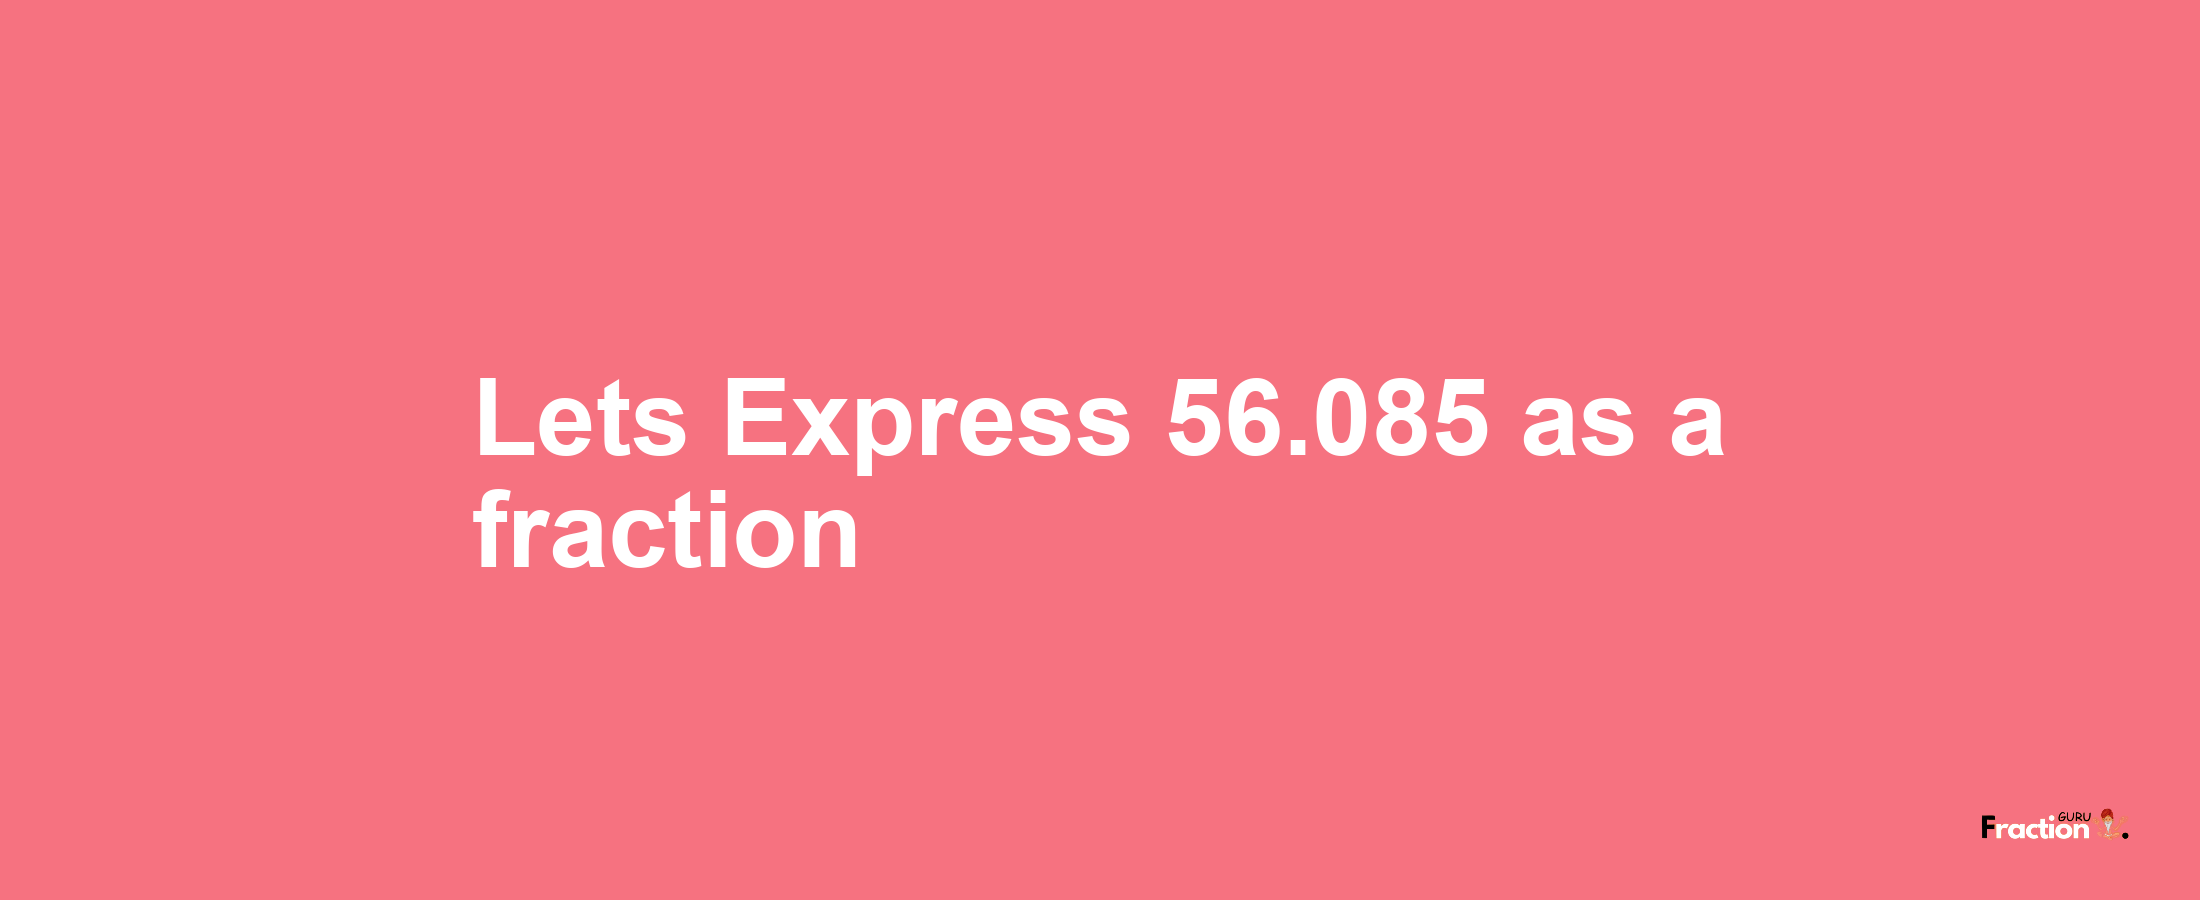 Lets Express 56.085 as afraction